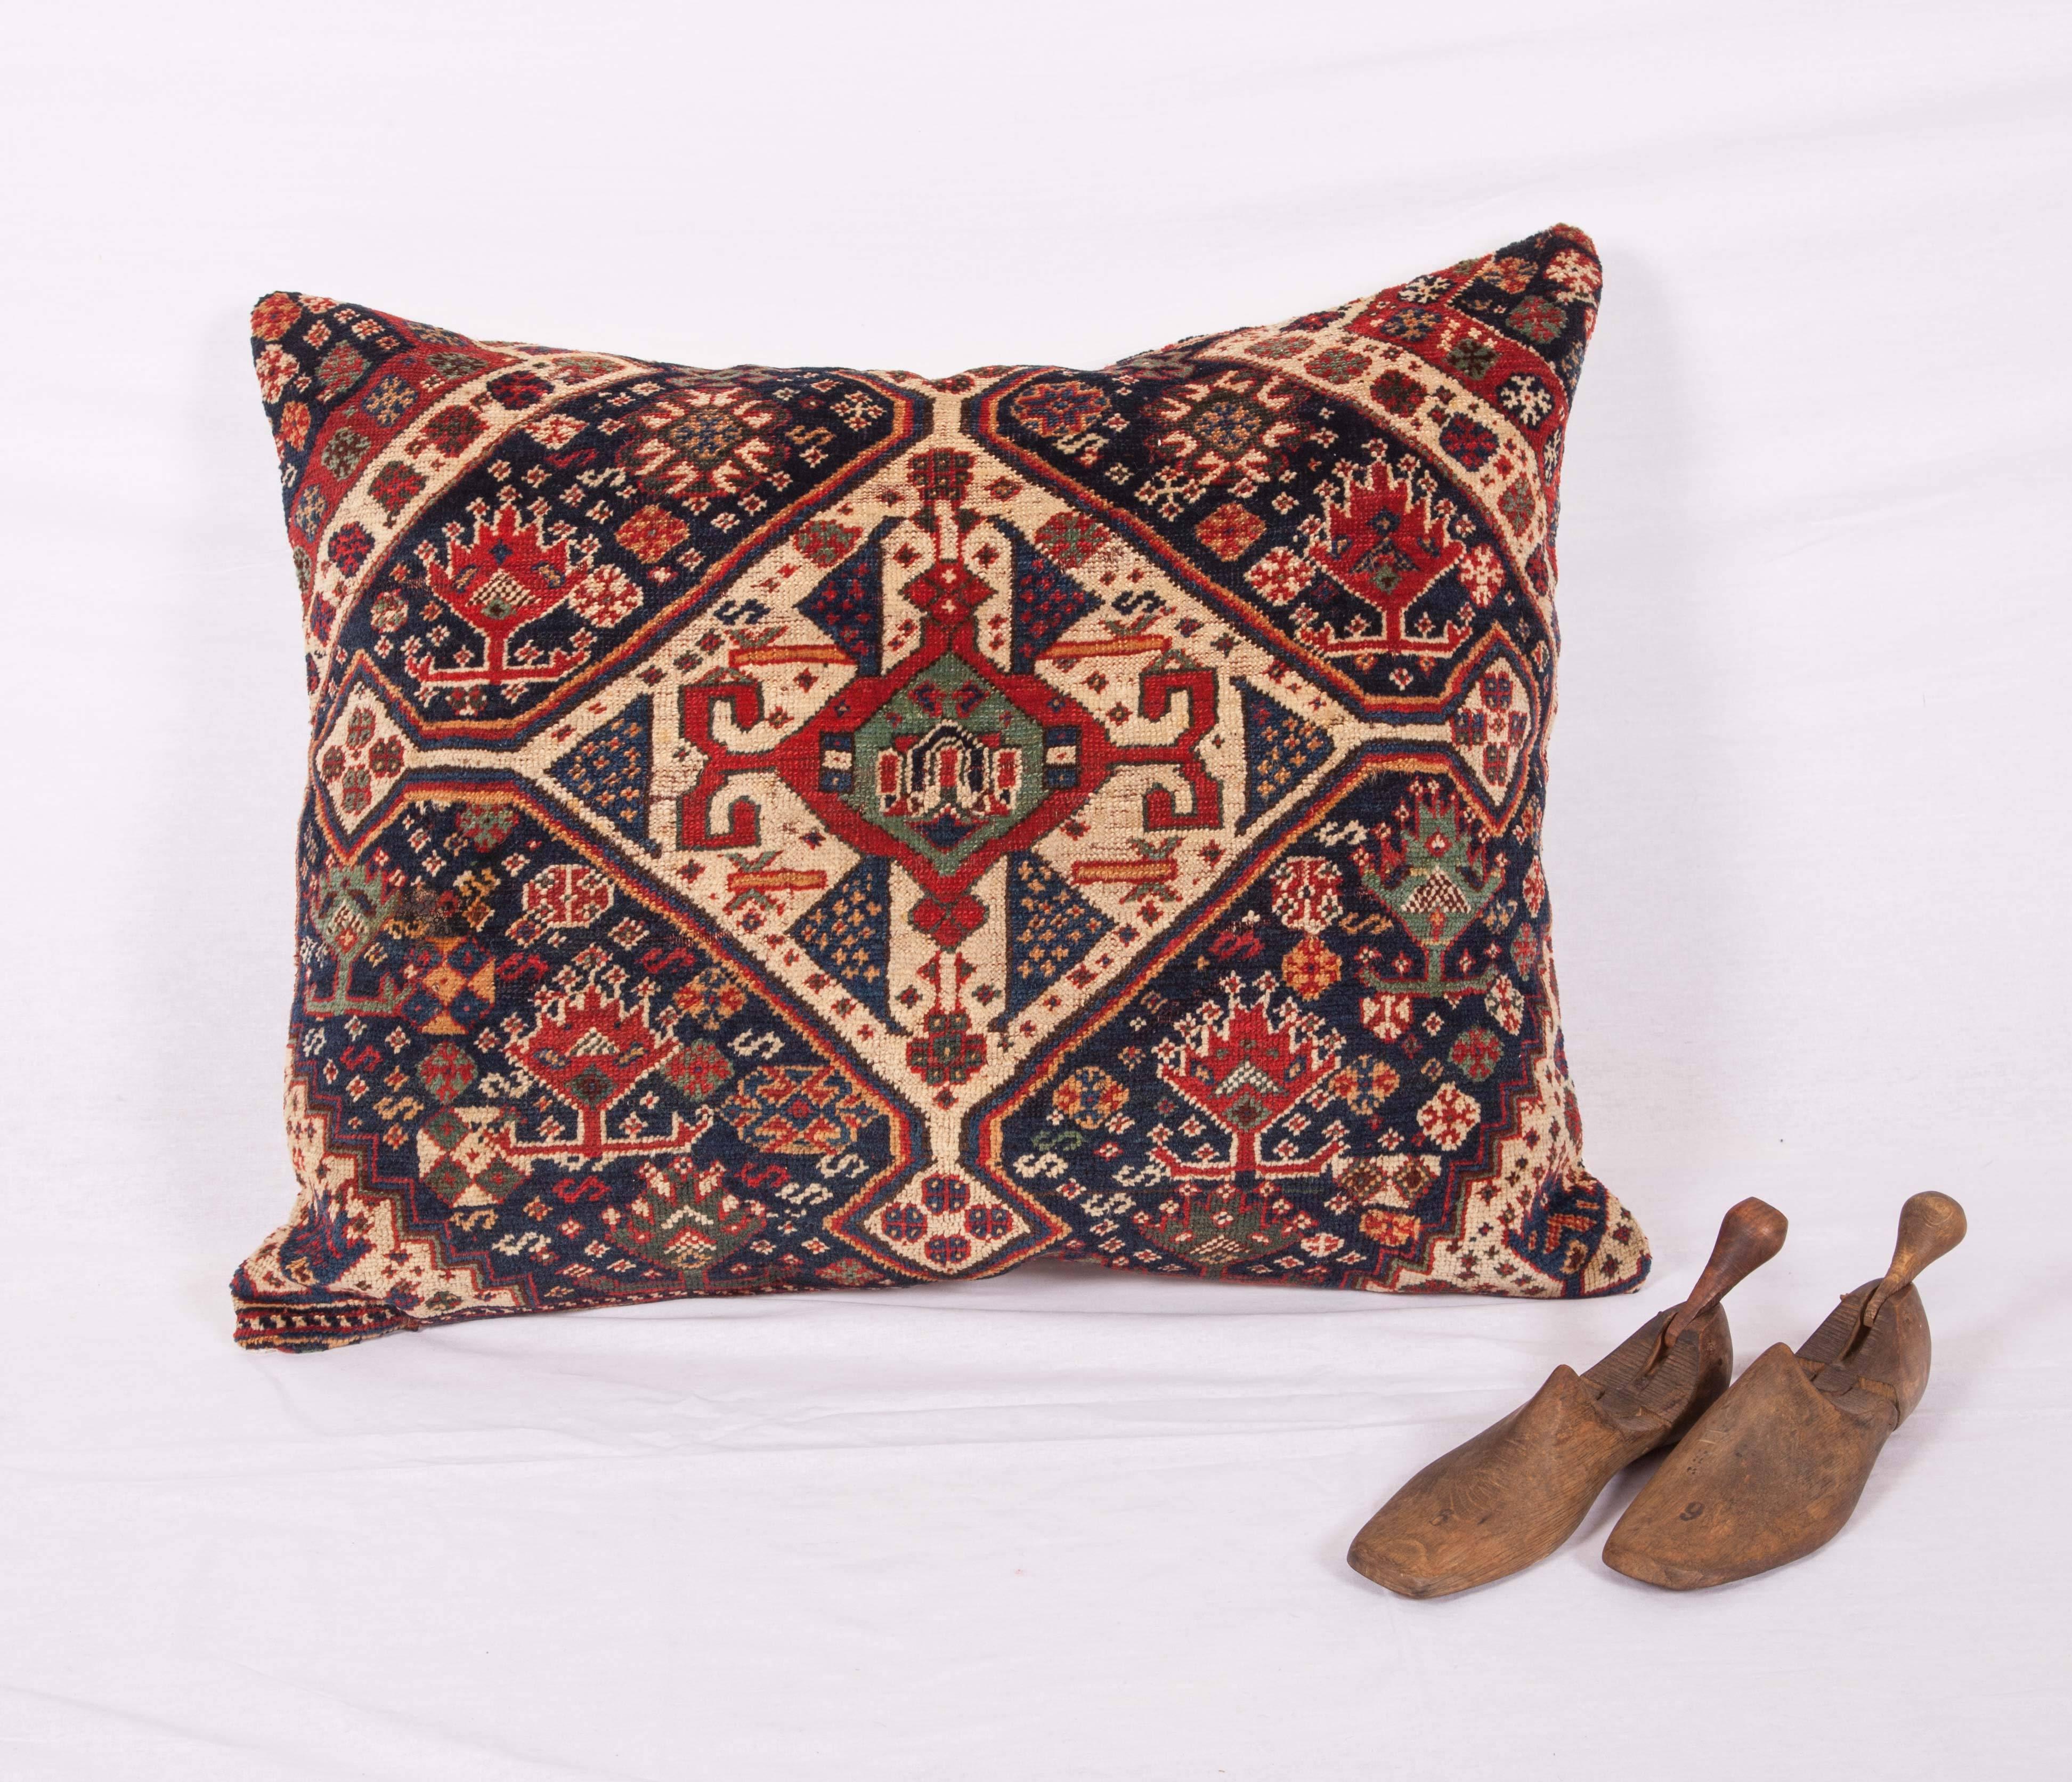 Antique pillow case fashioned from a 19th century. Kashgai wool rug fragment. It does not come with an insert but it comes with a bag made to the size and out of cotton to accommodate the filling. The backing is made of linen. Please note 'filling